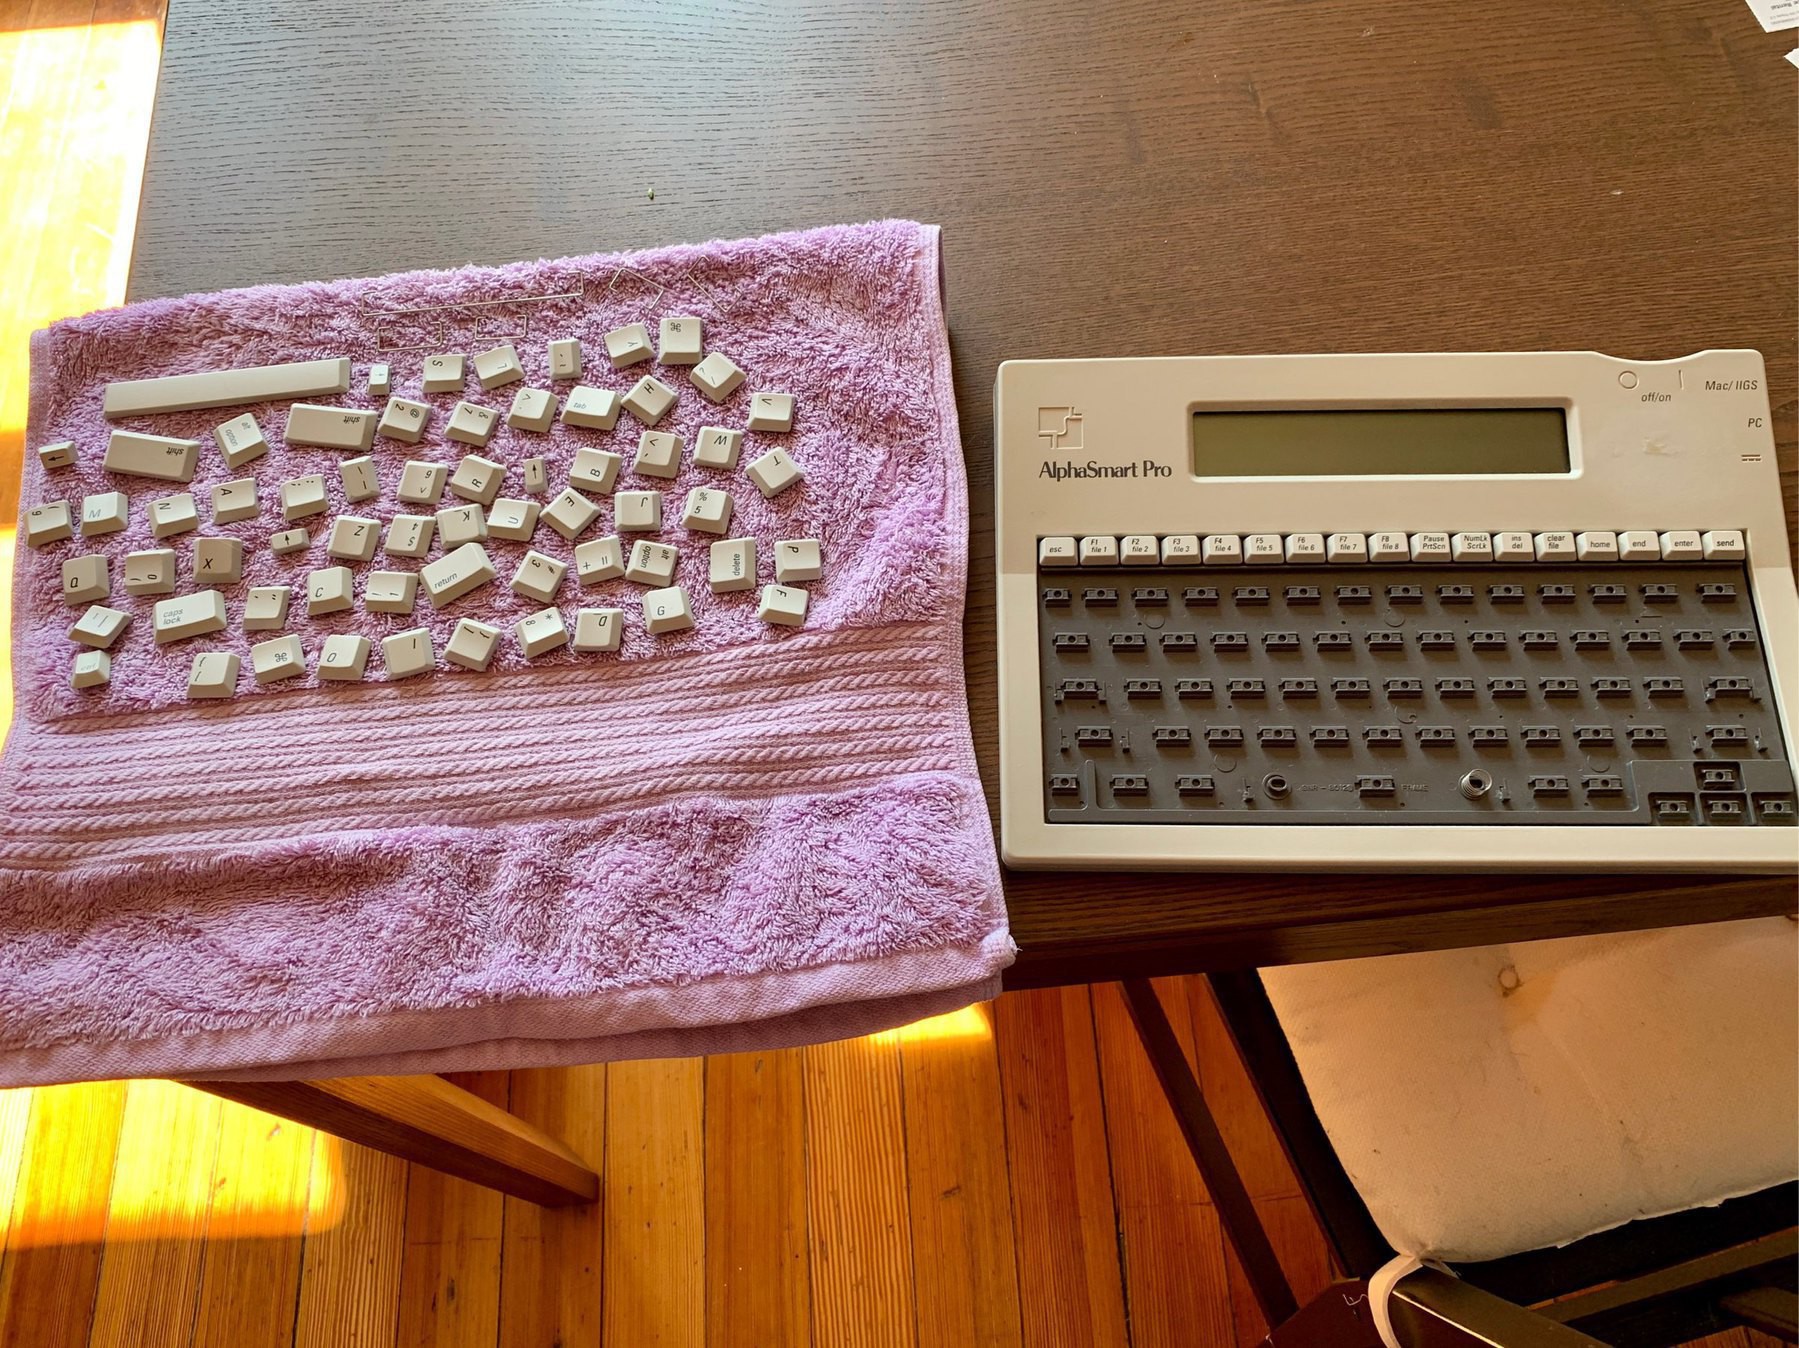 AlphaSmart Pro with all key caps removed